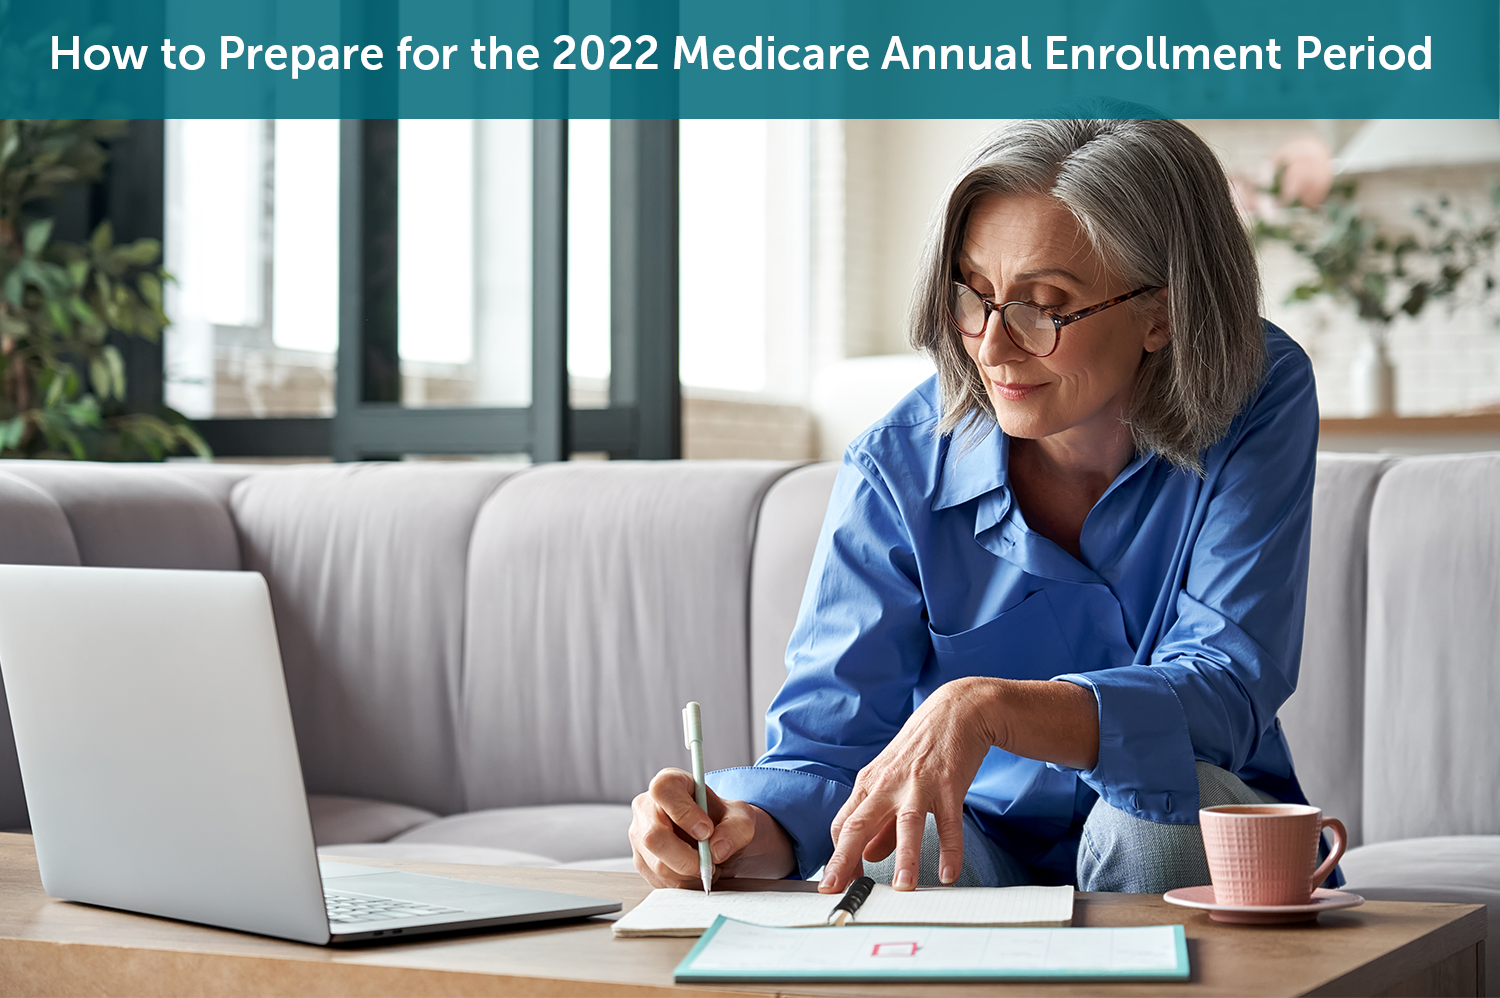 A white senior woman sitting on a grey couch in front of her laptop preparing for the Medicare Annual Enrollment Period